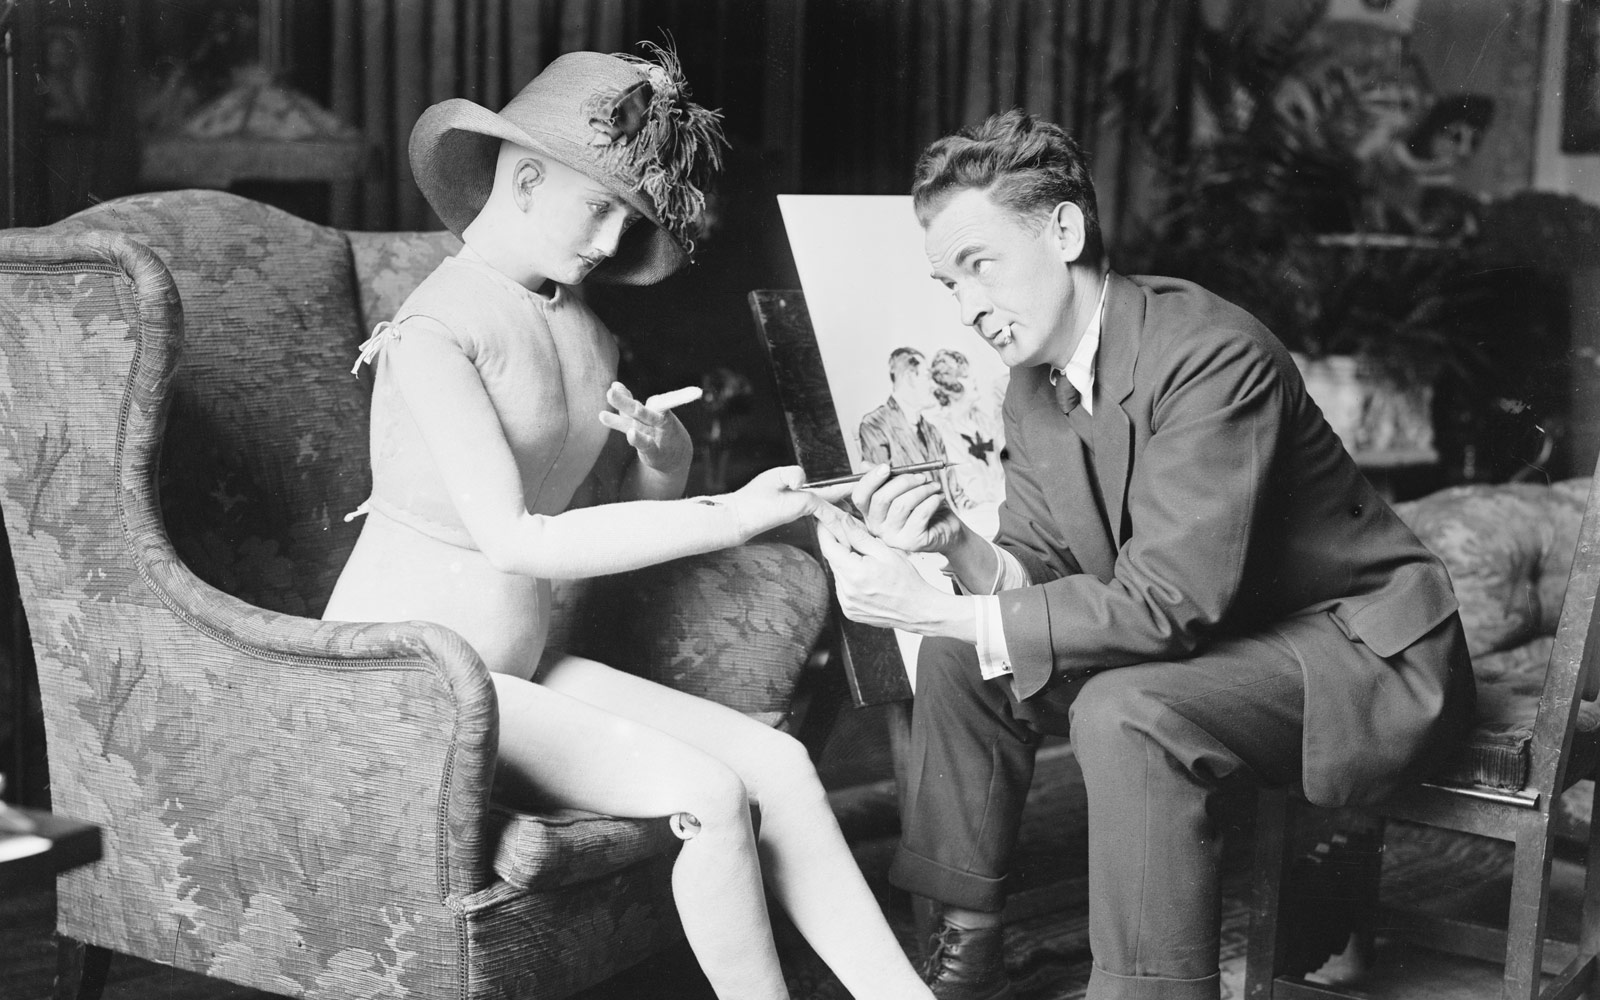 James Montgomery Flagg with a mannequin, 1913